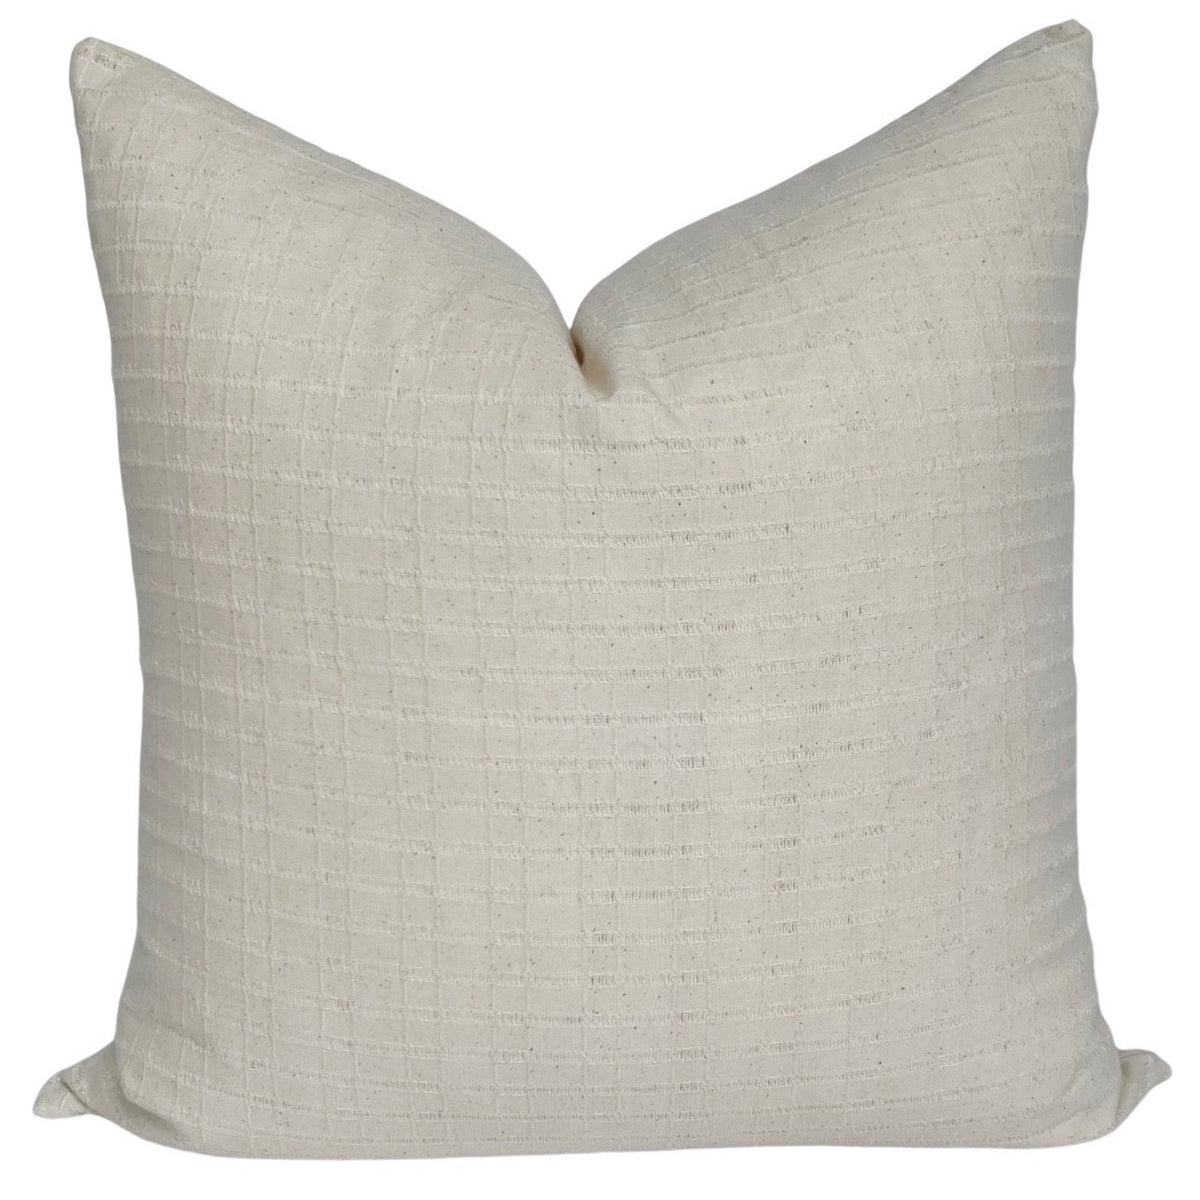 Checked Chiang Mai Woven Pillow Cover | Ivory